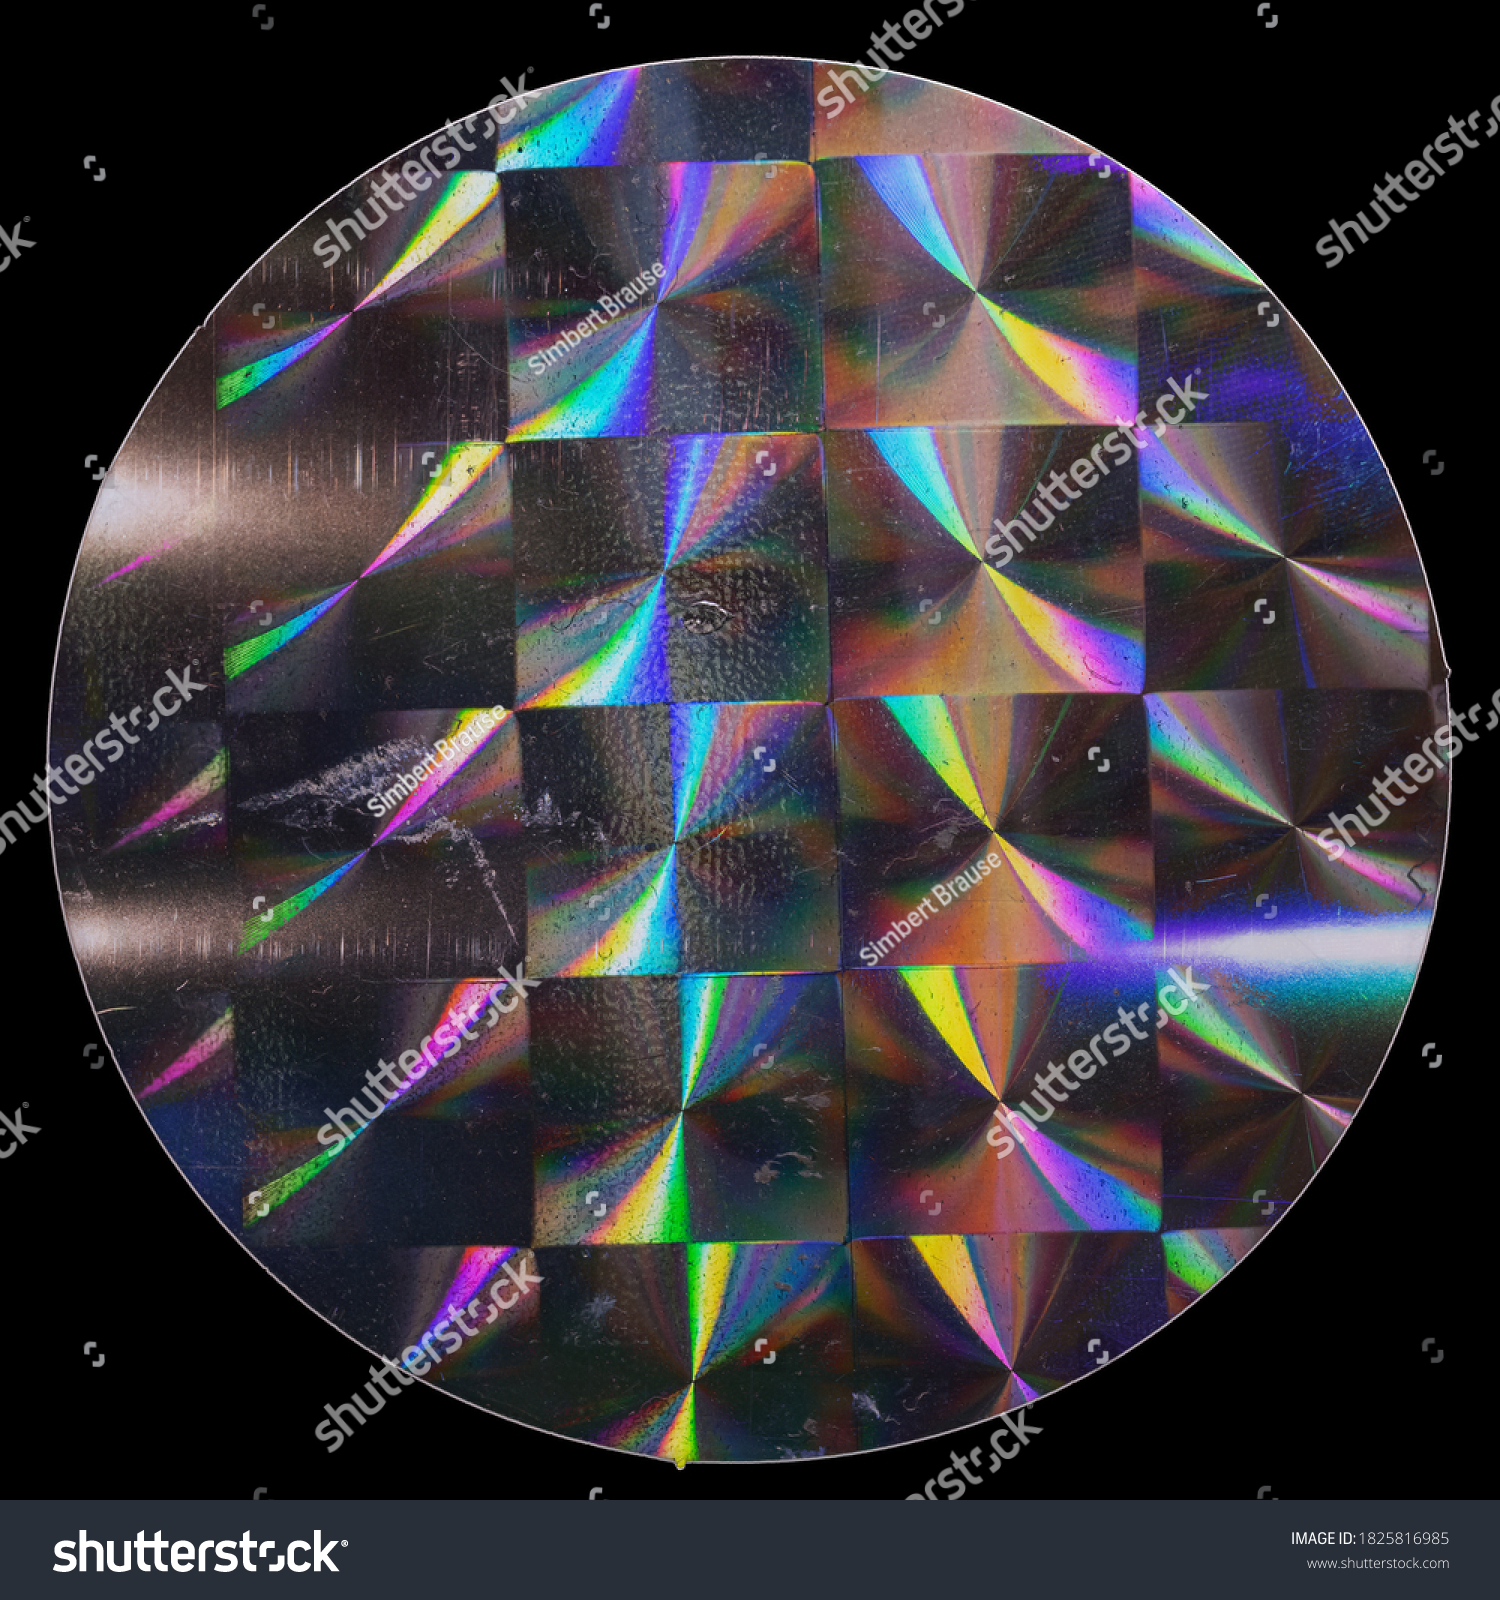 macro top shot photo of holographic foil sticker with cool grid pattern texture, holo sticker on real paper sheet isolated on black background with nice light reflections and scratches. #1825816985